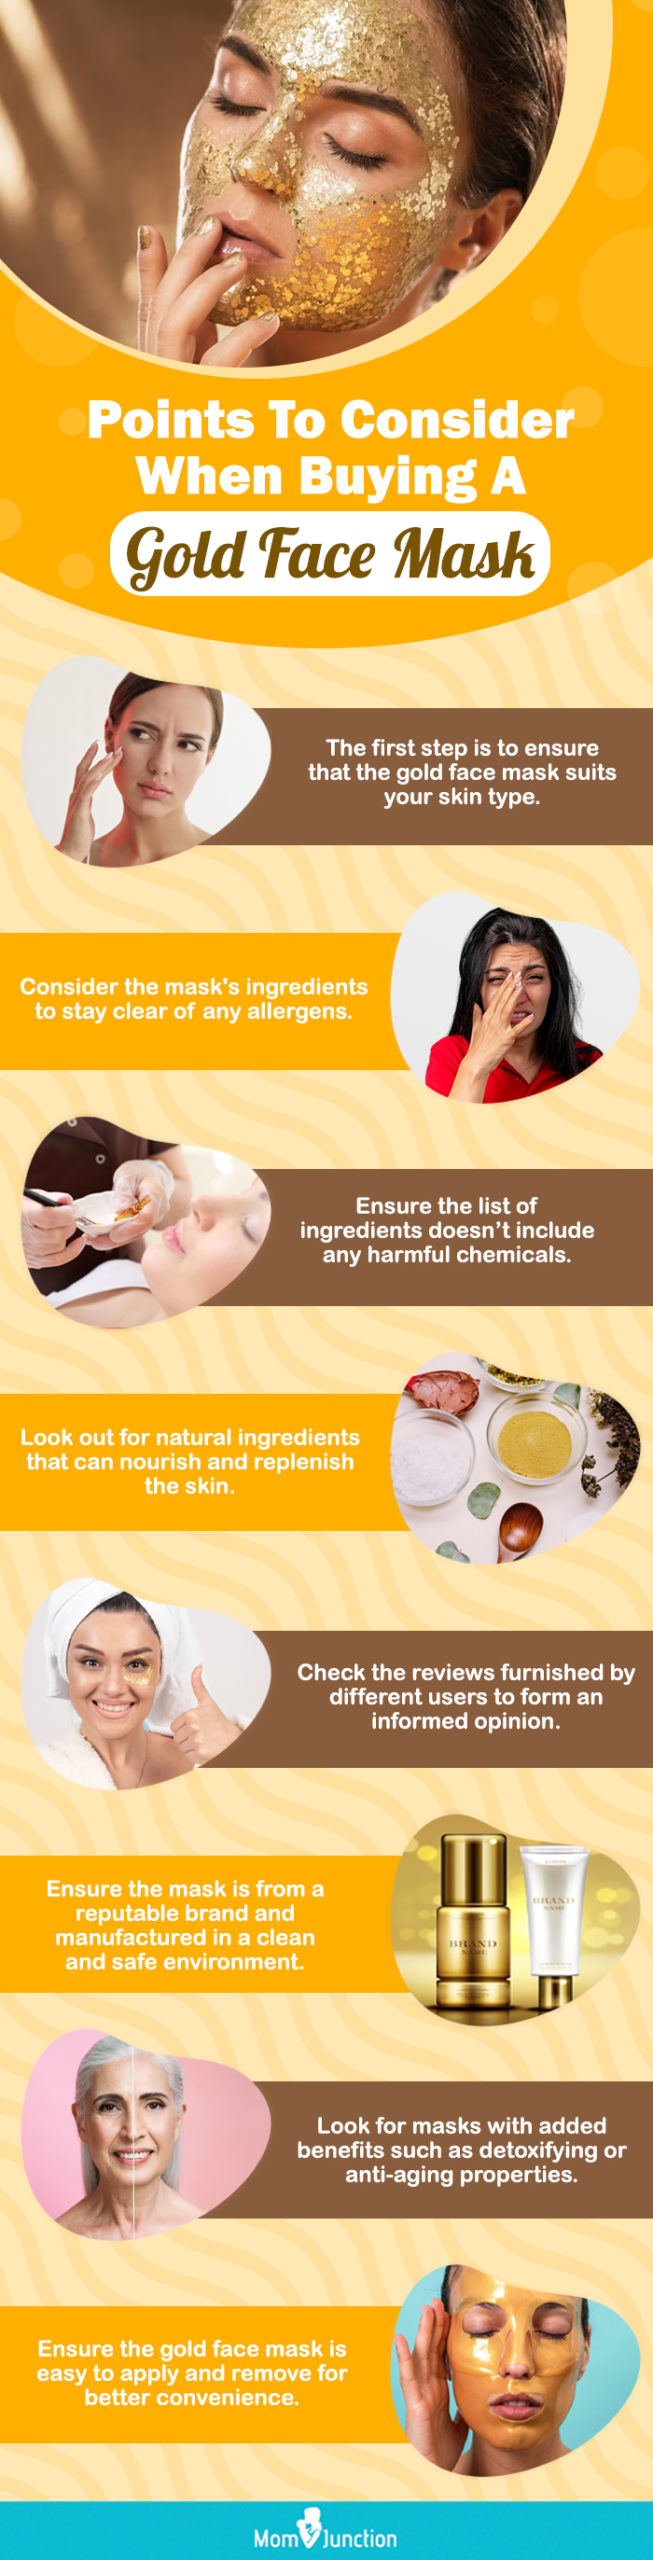 Points To Consider When Buying A Gold Face Mask (infographic)